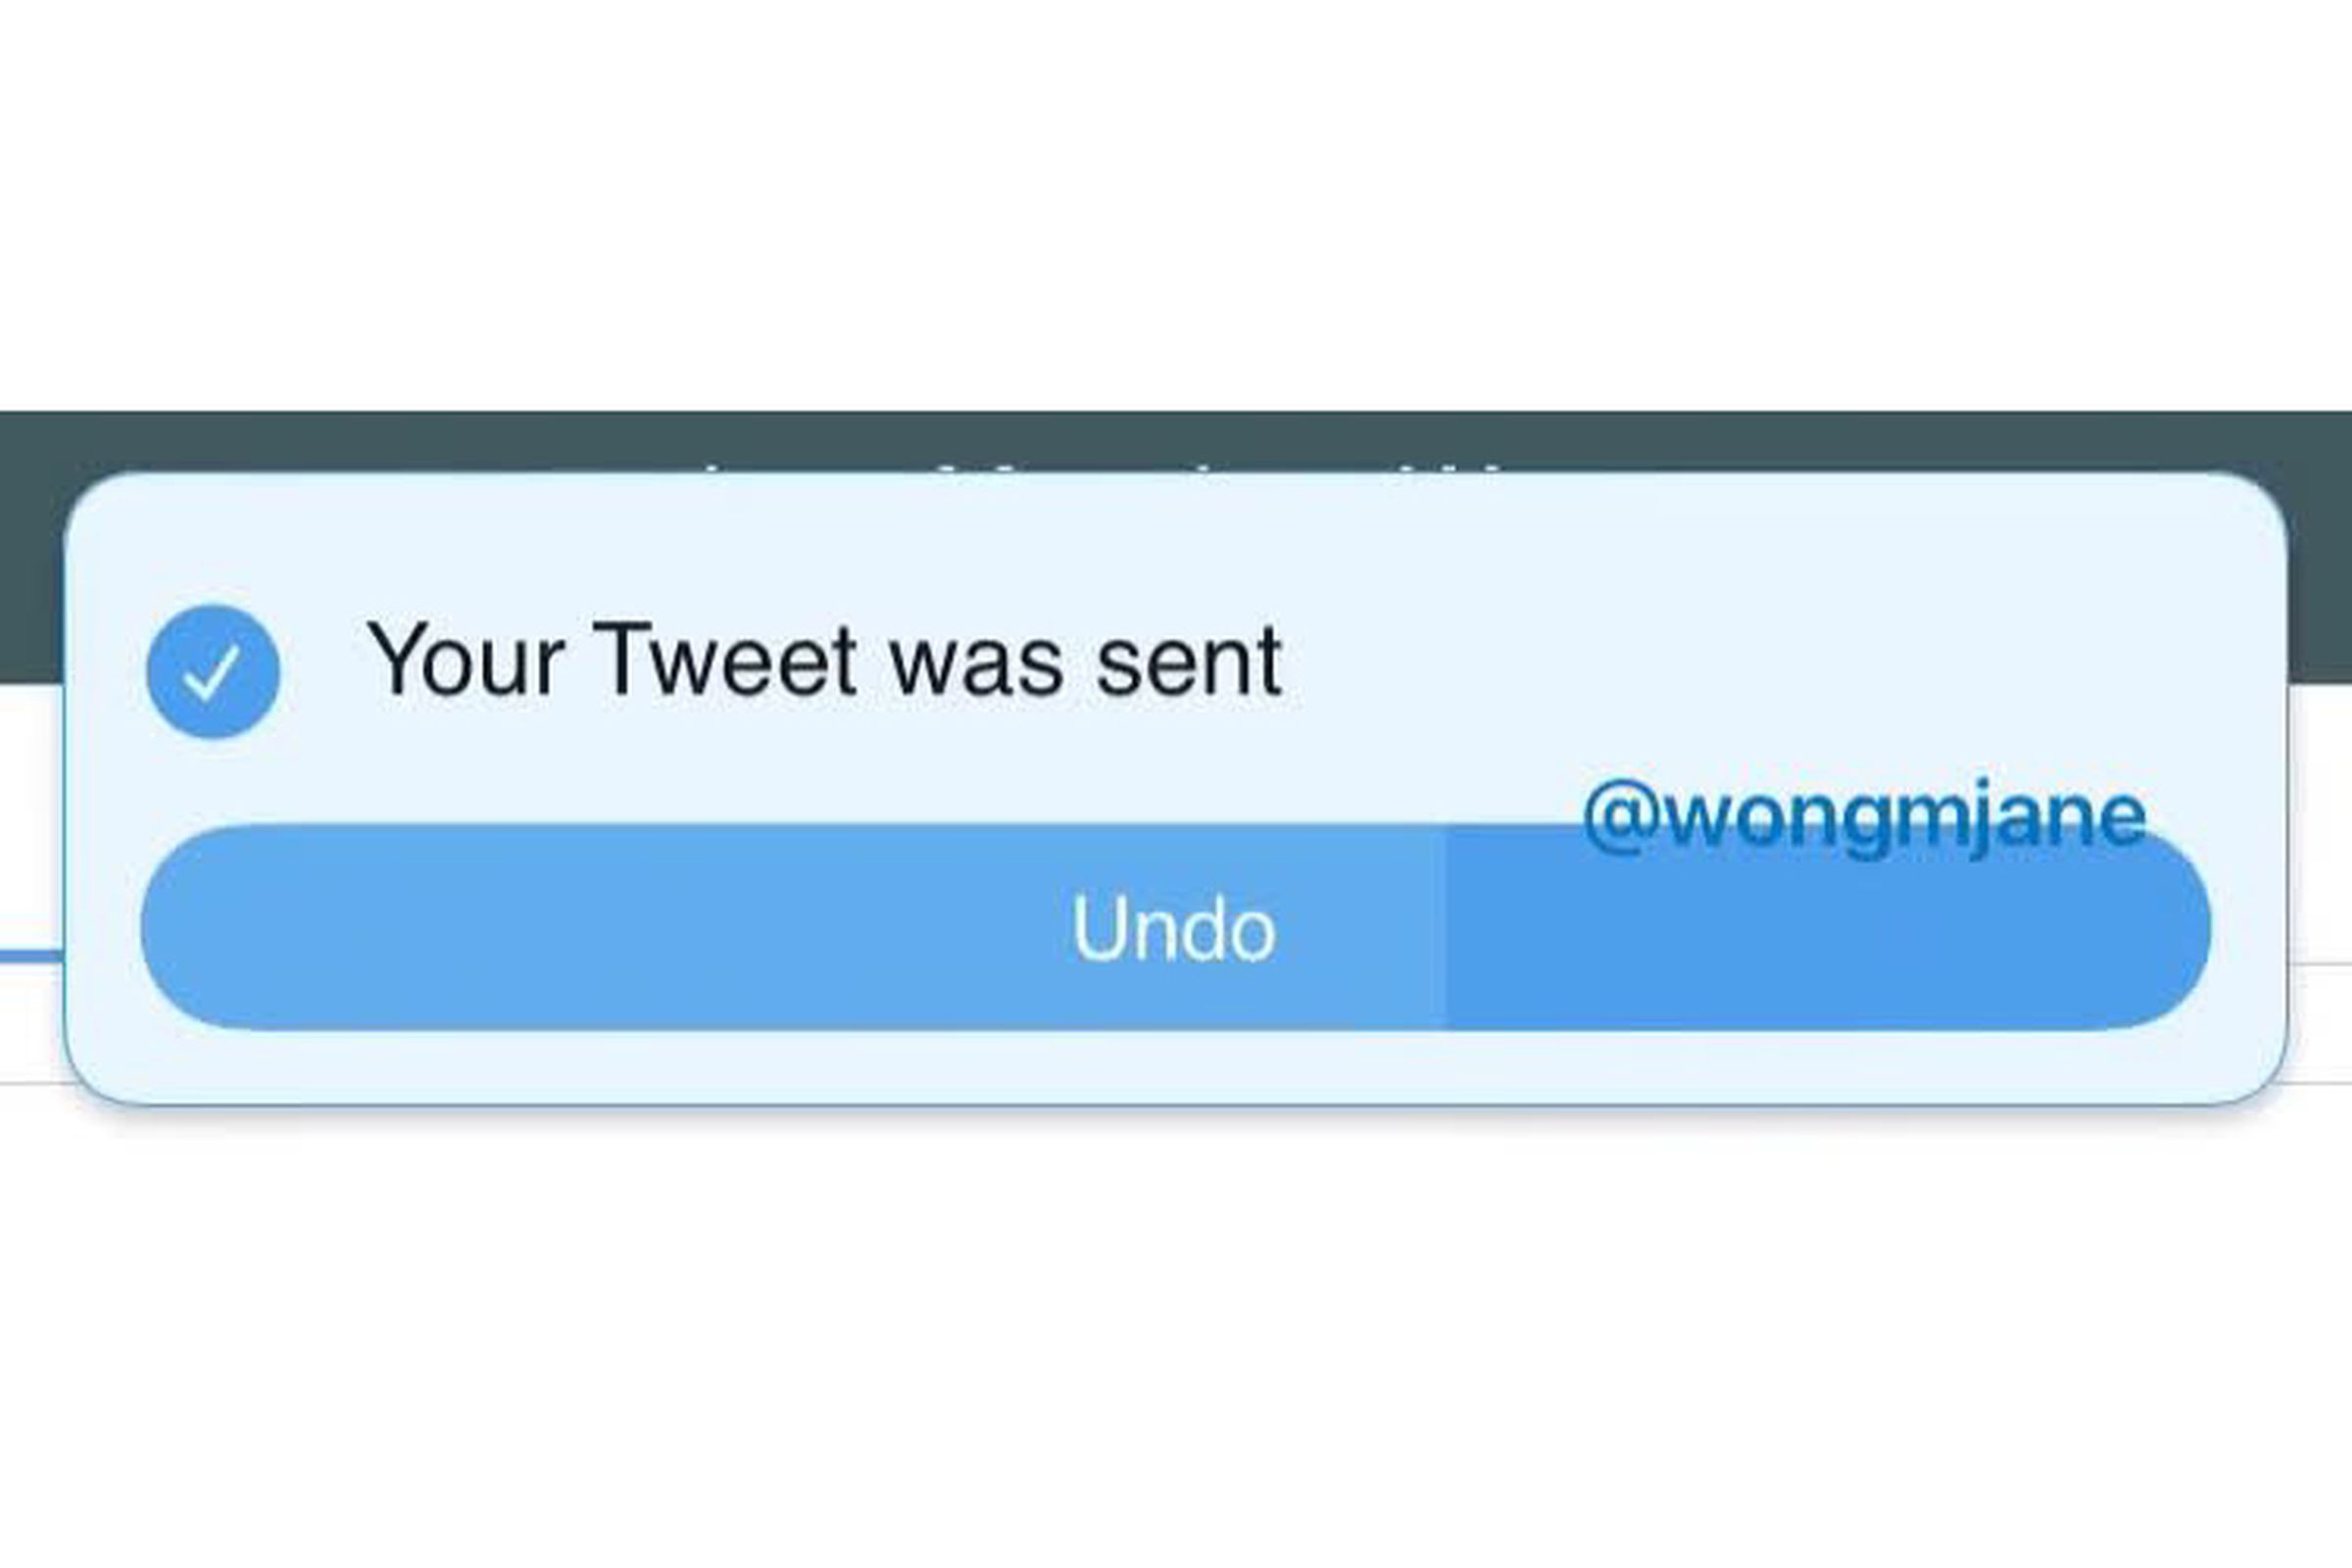 Alongside the typical “Your Tweet was sent” dialogue, there’s a new Undo button.